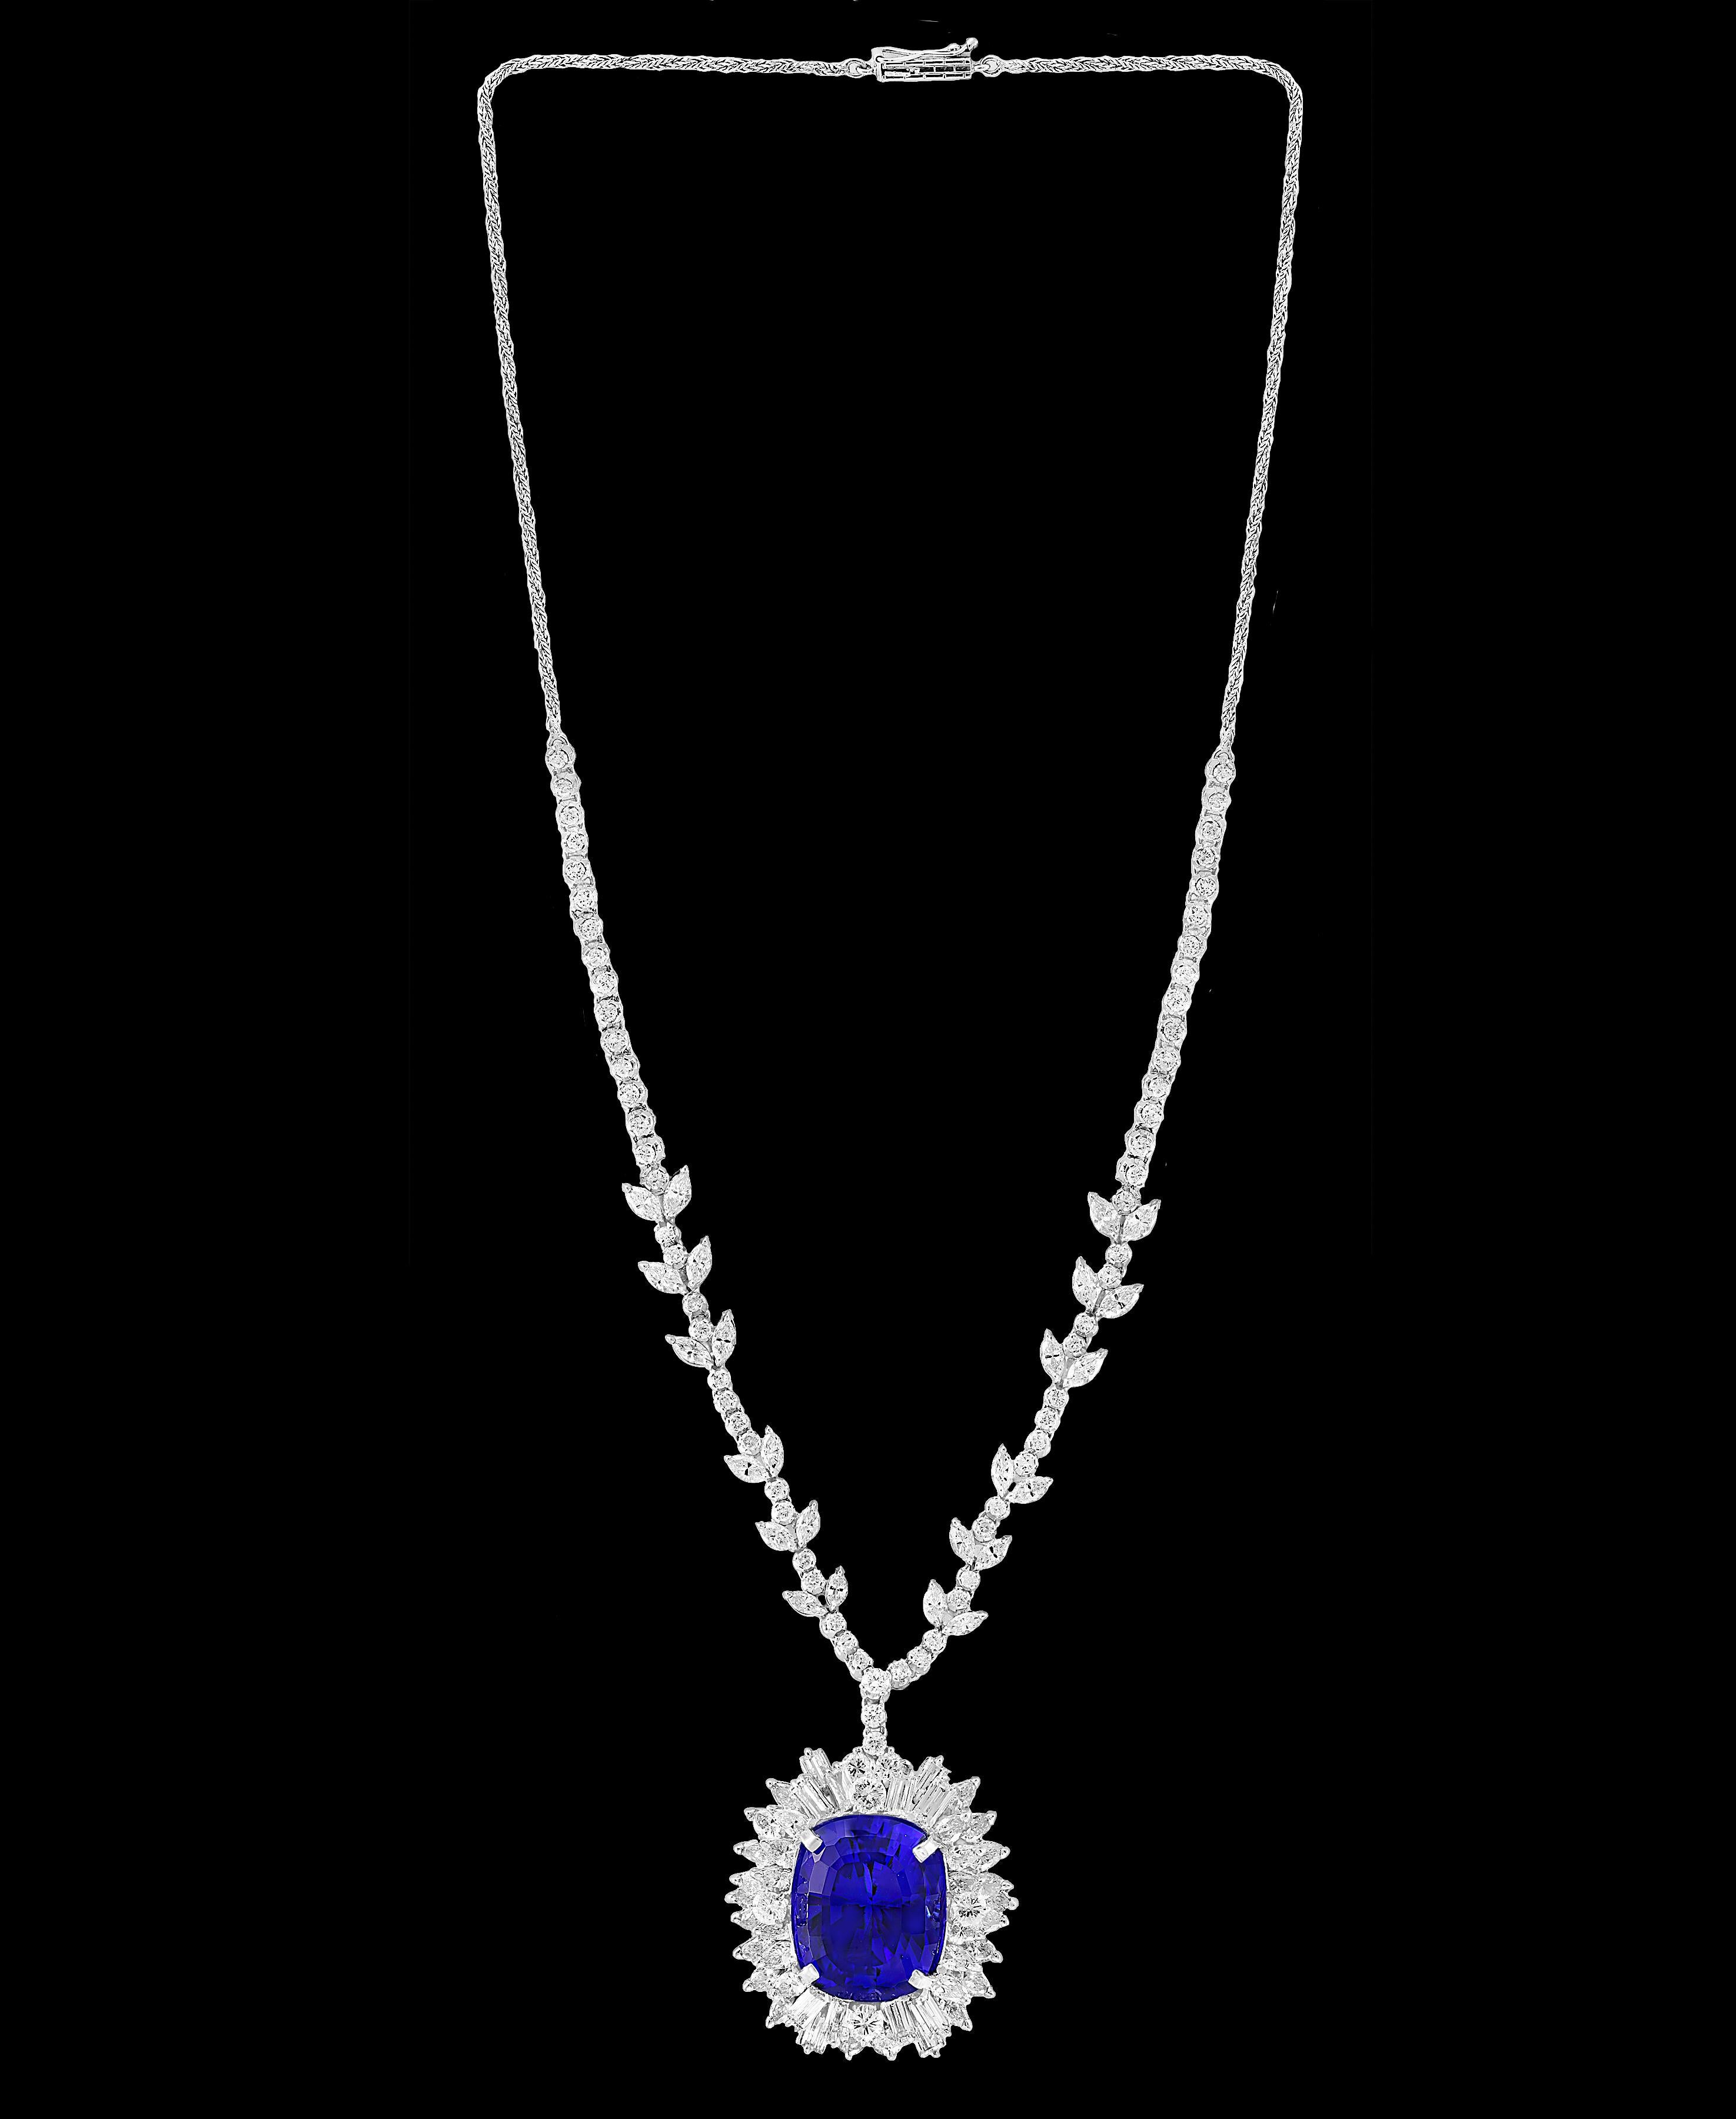 43 Carat Cushion-Cut Tanzanite Pendant Necklace with 18 Carat Diamonds, Estate In Excellent Condition For Sale In New York, NY